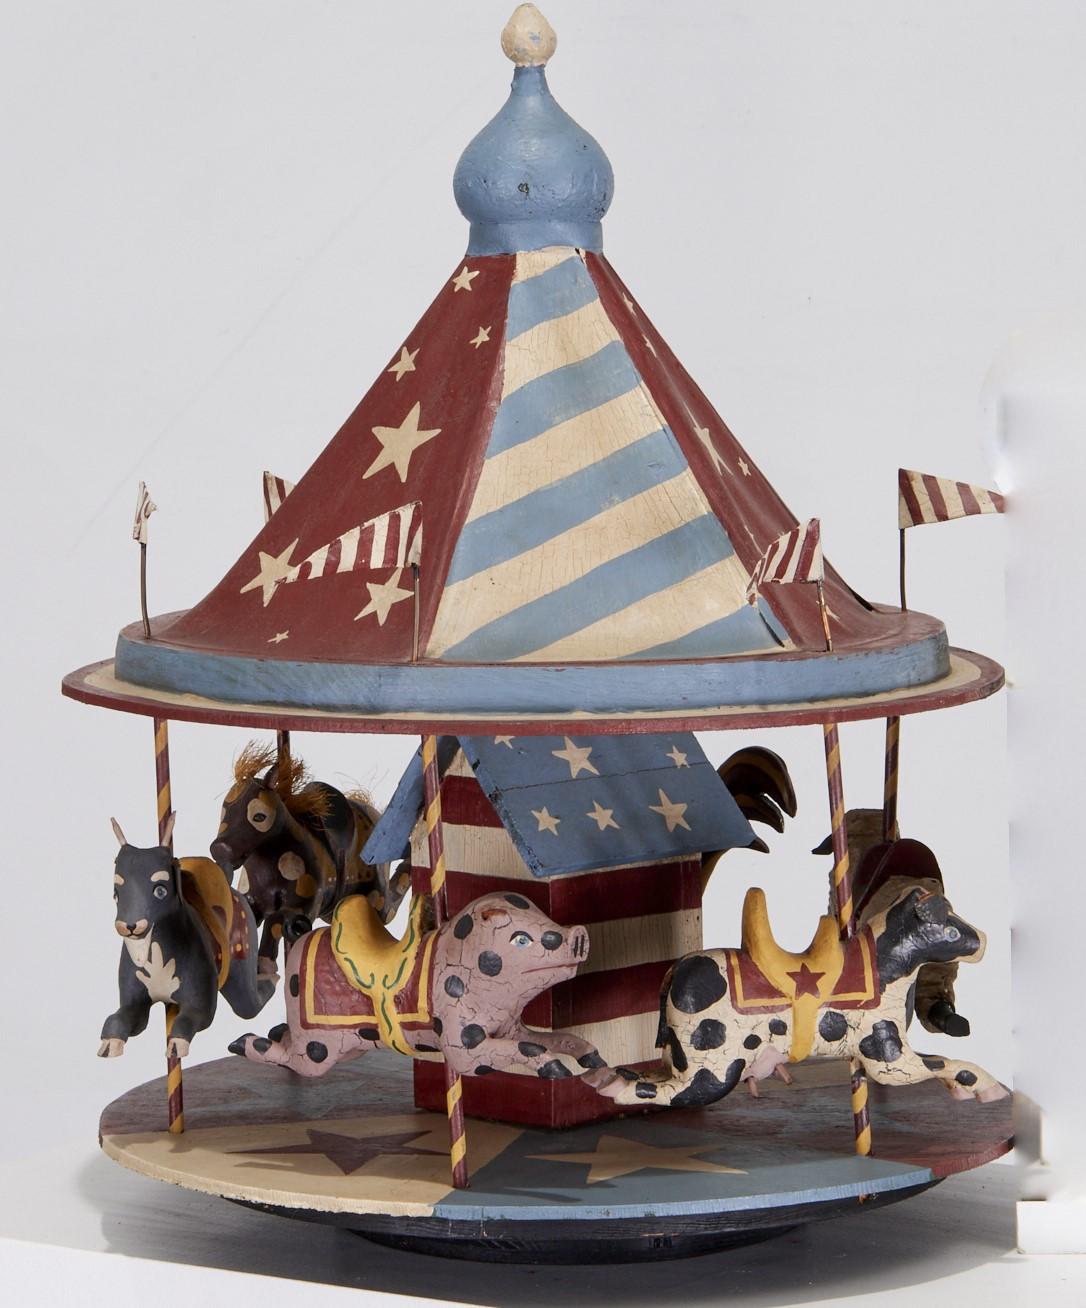 20th c., Large Folk Art carousel with animals on a rotating base.Made of wood and canvas construction, with leather and other accent materials unsigned. The animals depicted are a horse, goat, pig, cow, sheep and rooster. Each animal is colorfully